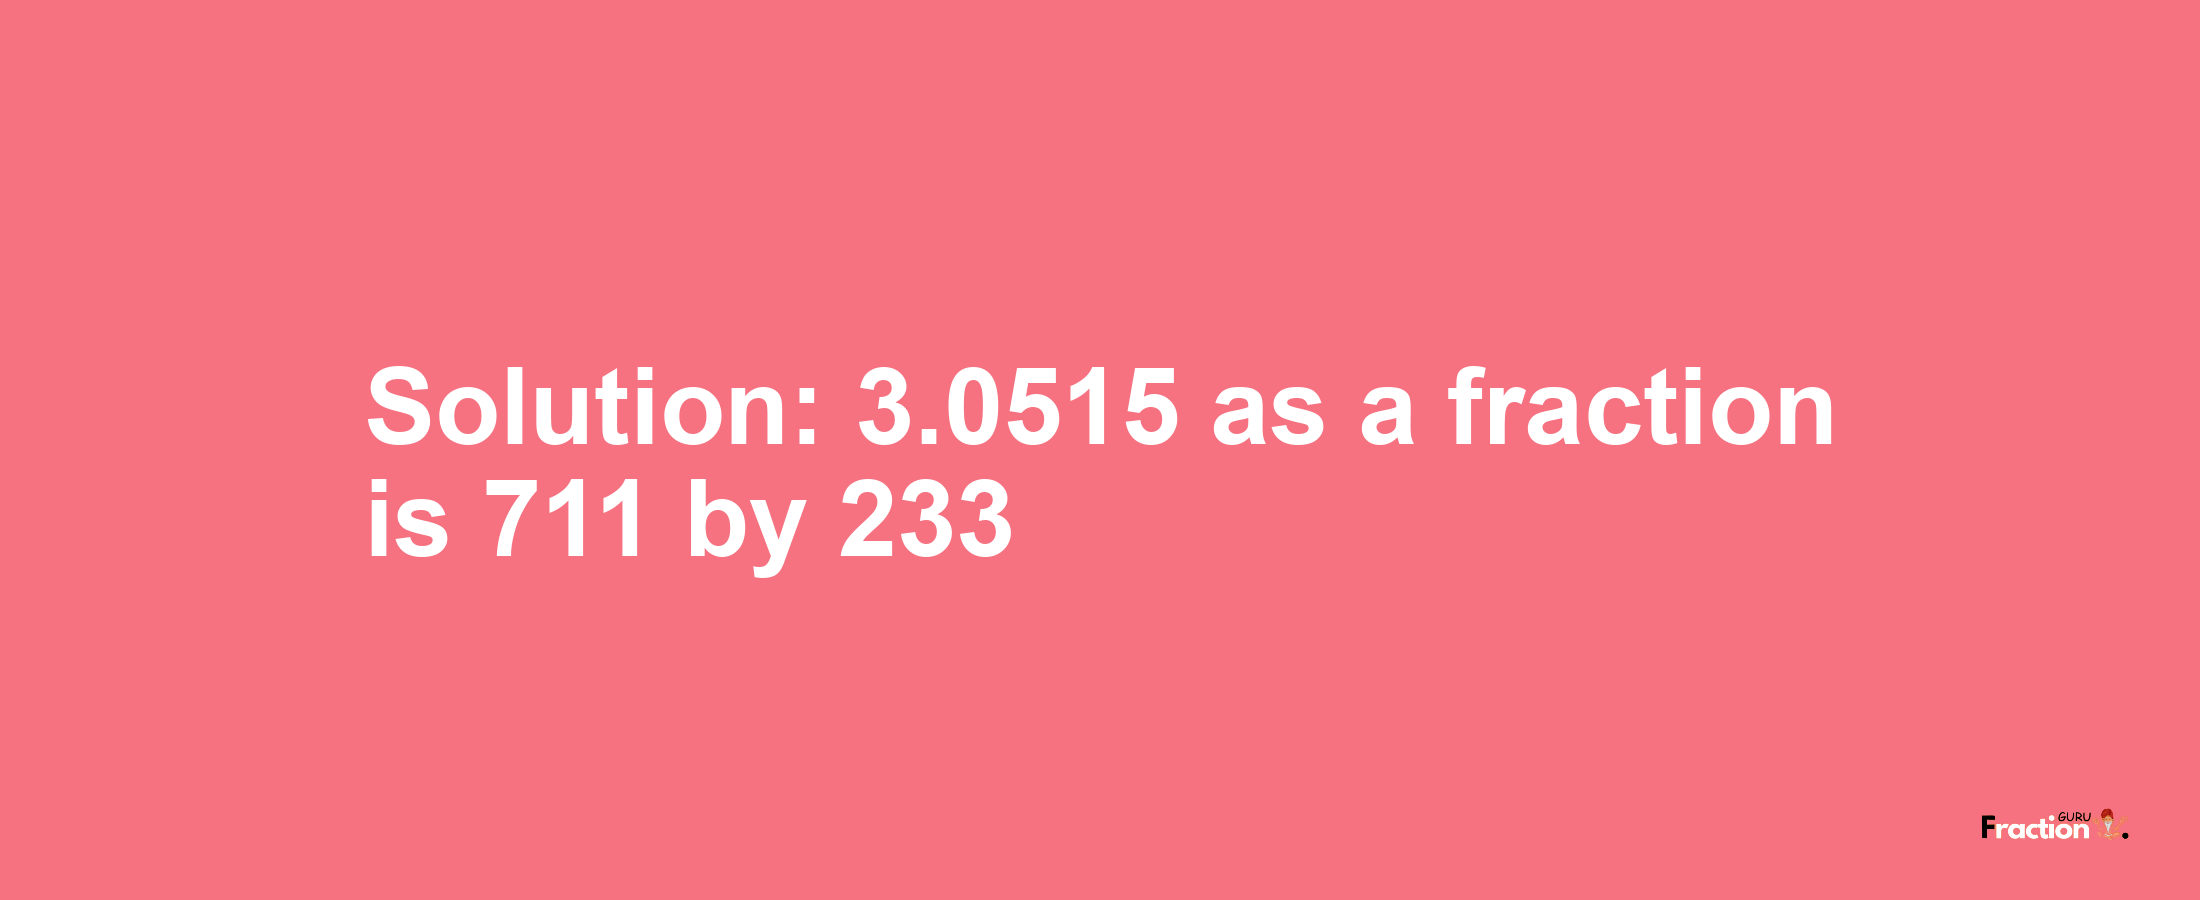 Solution:3.0515 as a fraction is 711/233